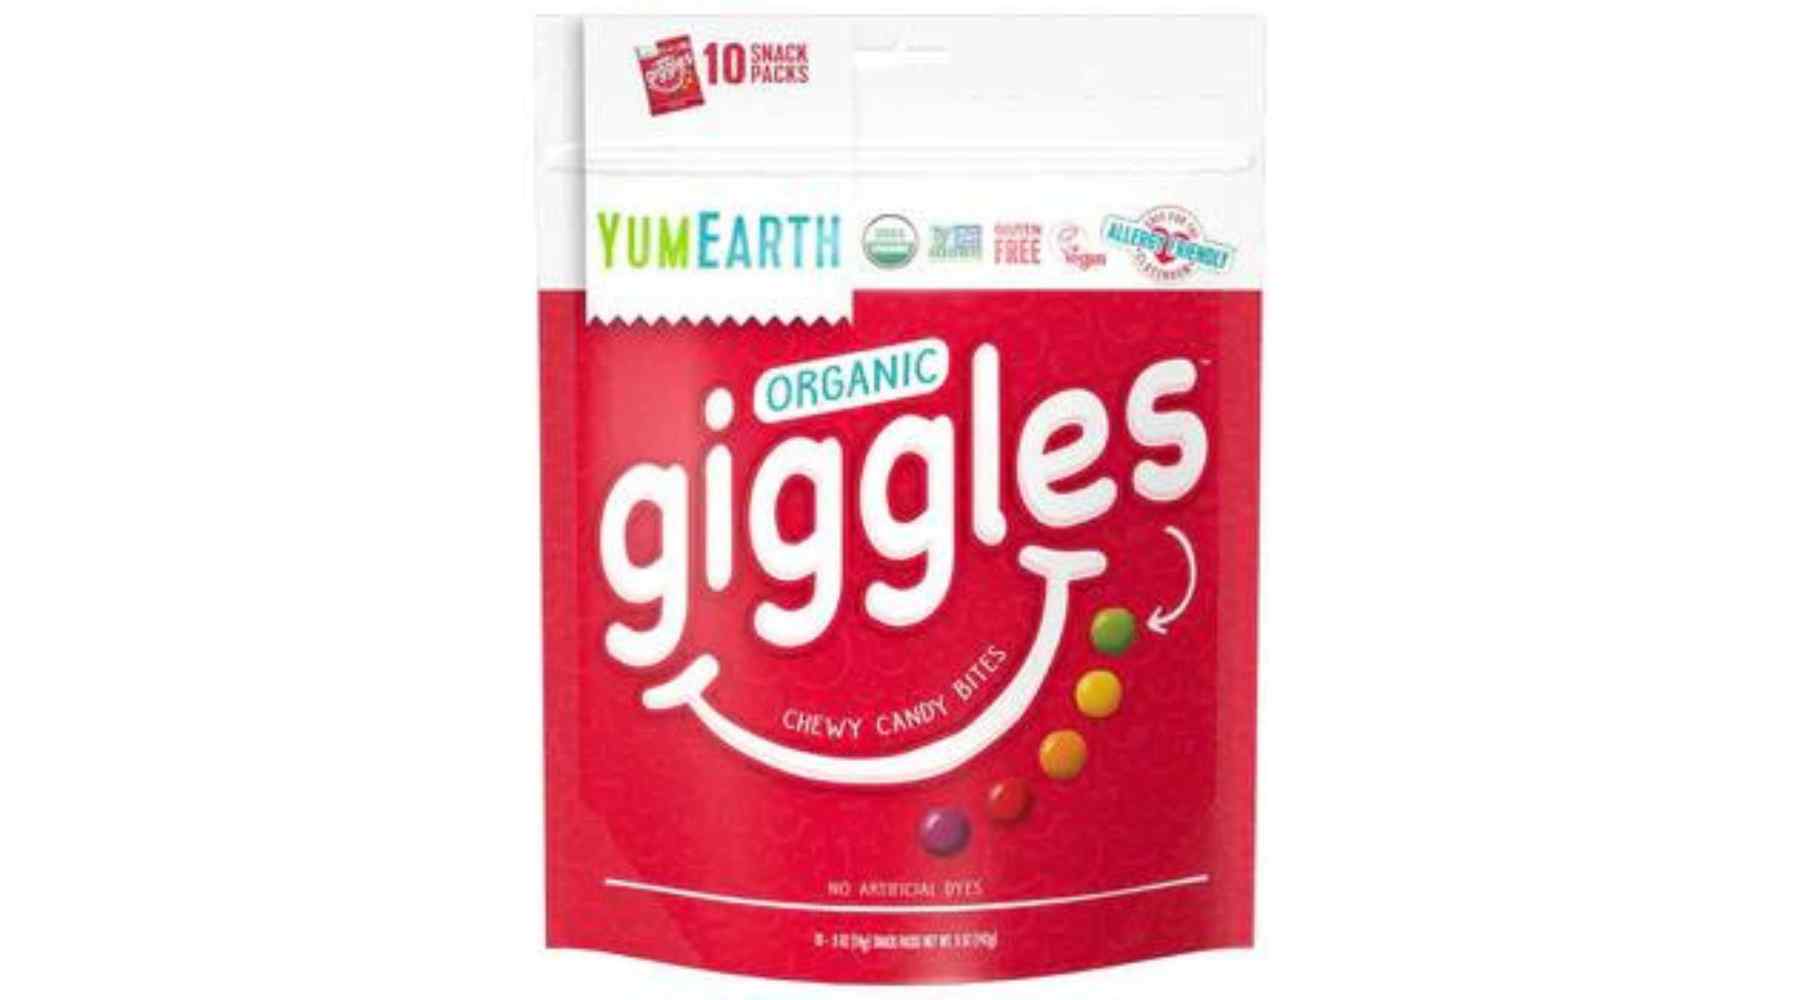 Yum Earth’s Sour Giggles Organic Chewy Candy Bites